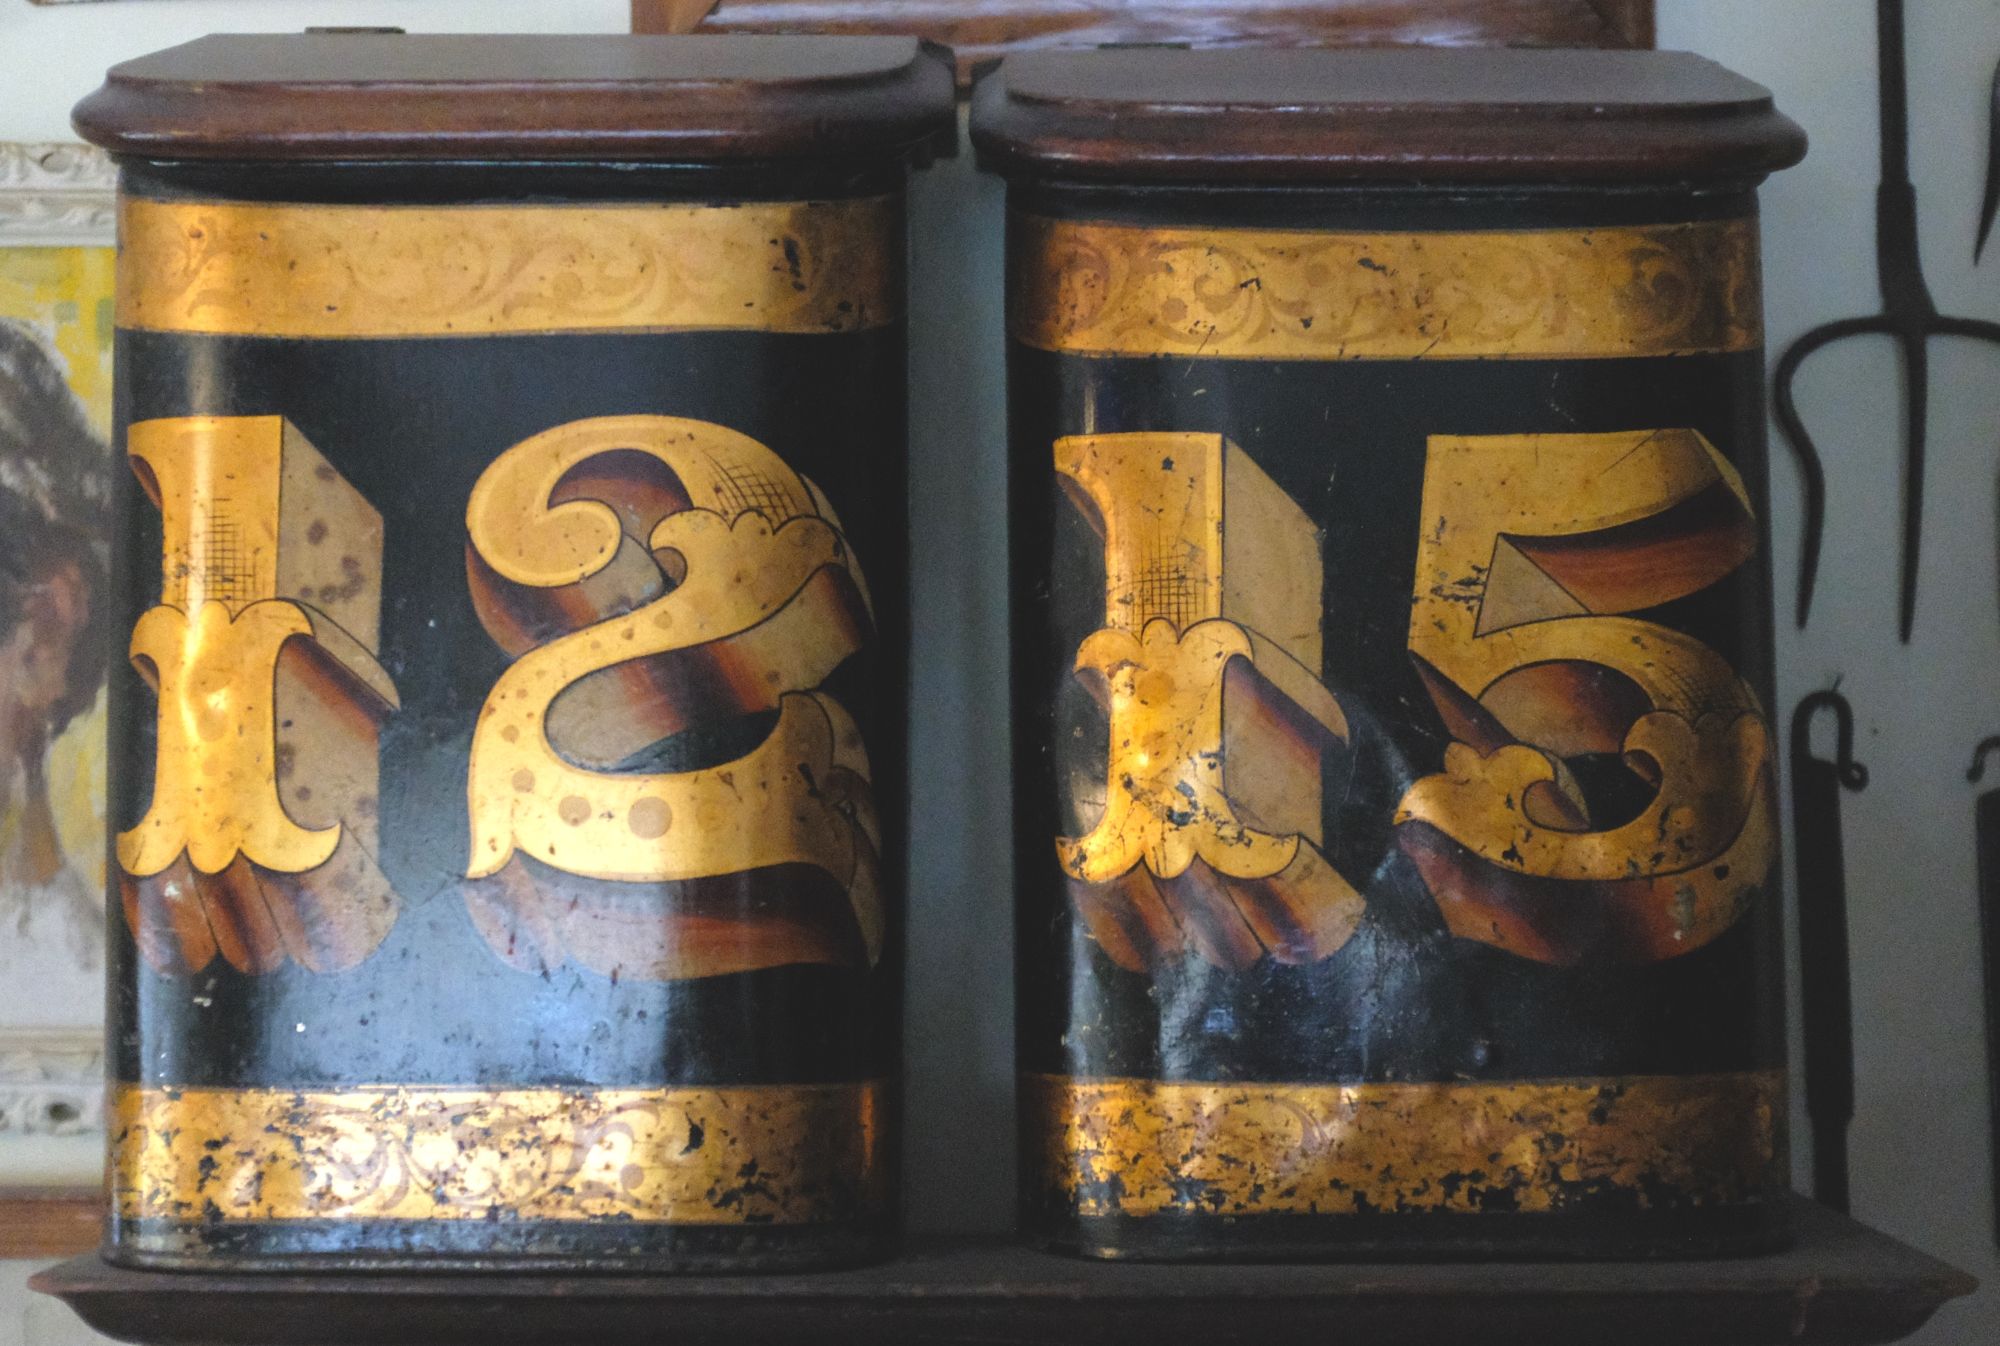 Wooden containers with number 12 and 15 on them.